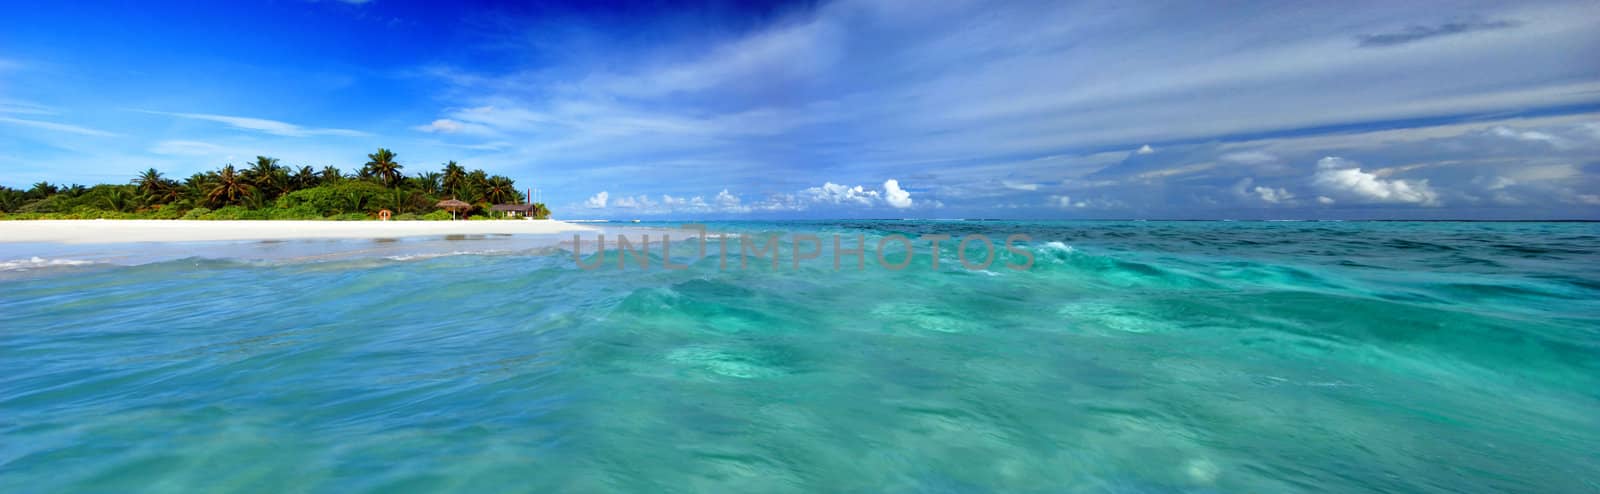 Beautiful Maldivian atoll with white beach seen from the sea - wide panoramic shot